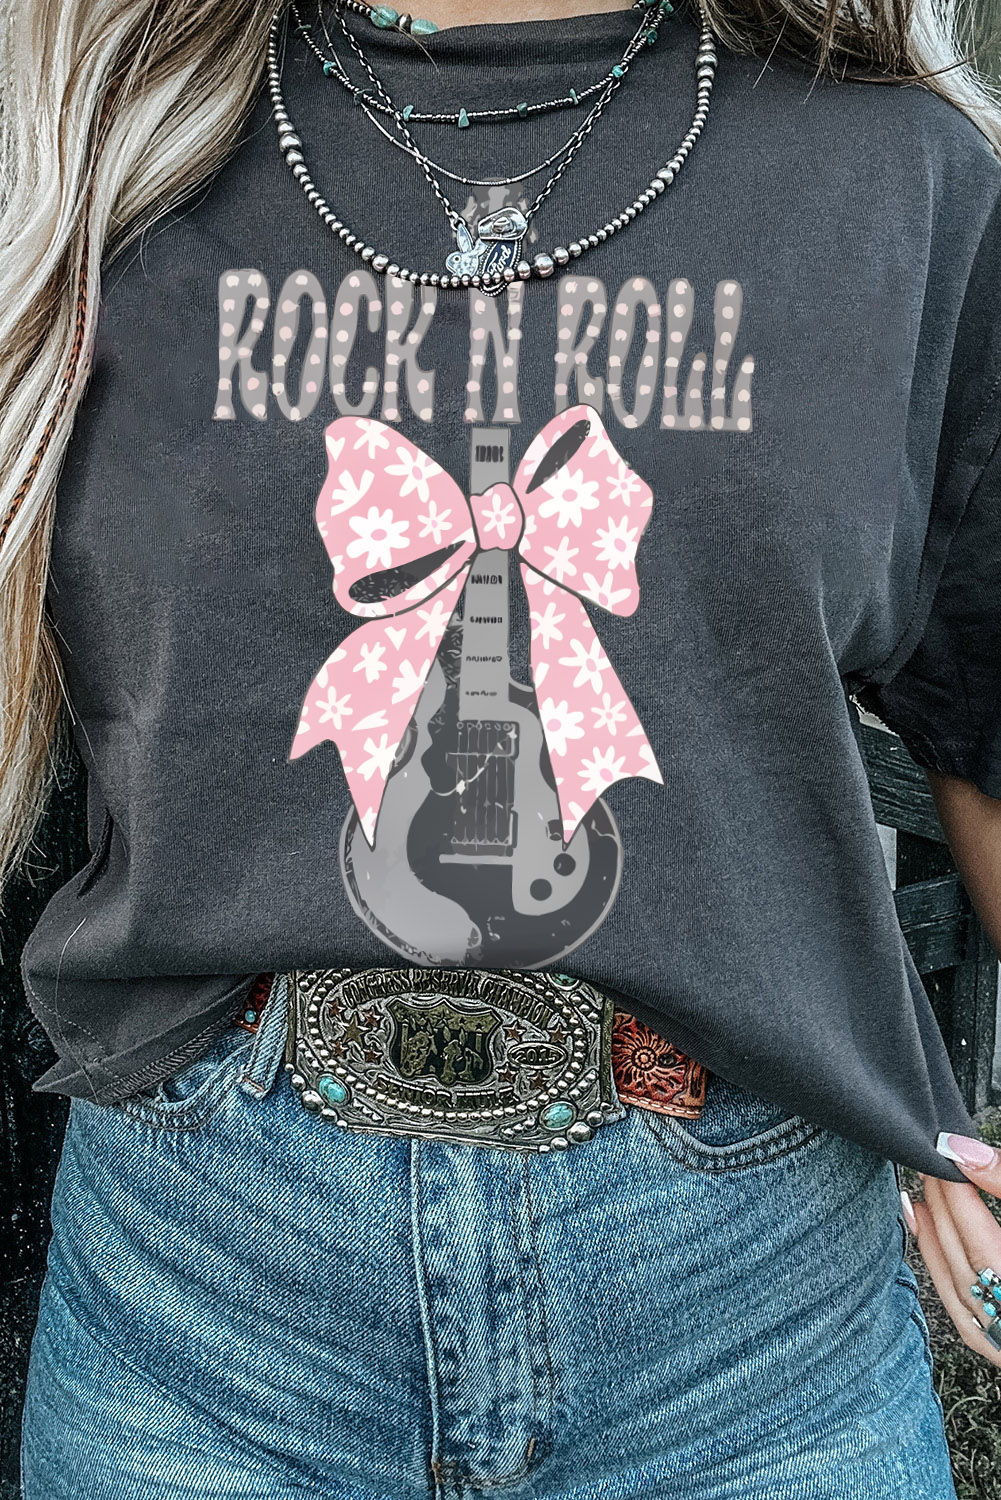 Shewin Wholesale Casual Black ROCK N ROLL Bowknot Guitar Graphic T SHIRT